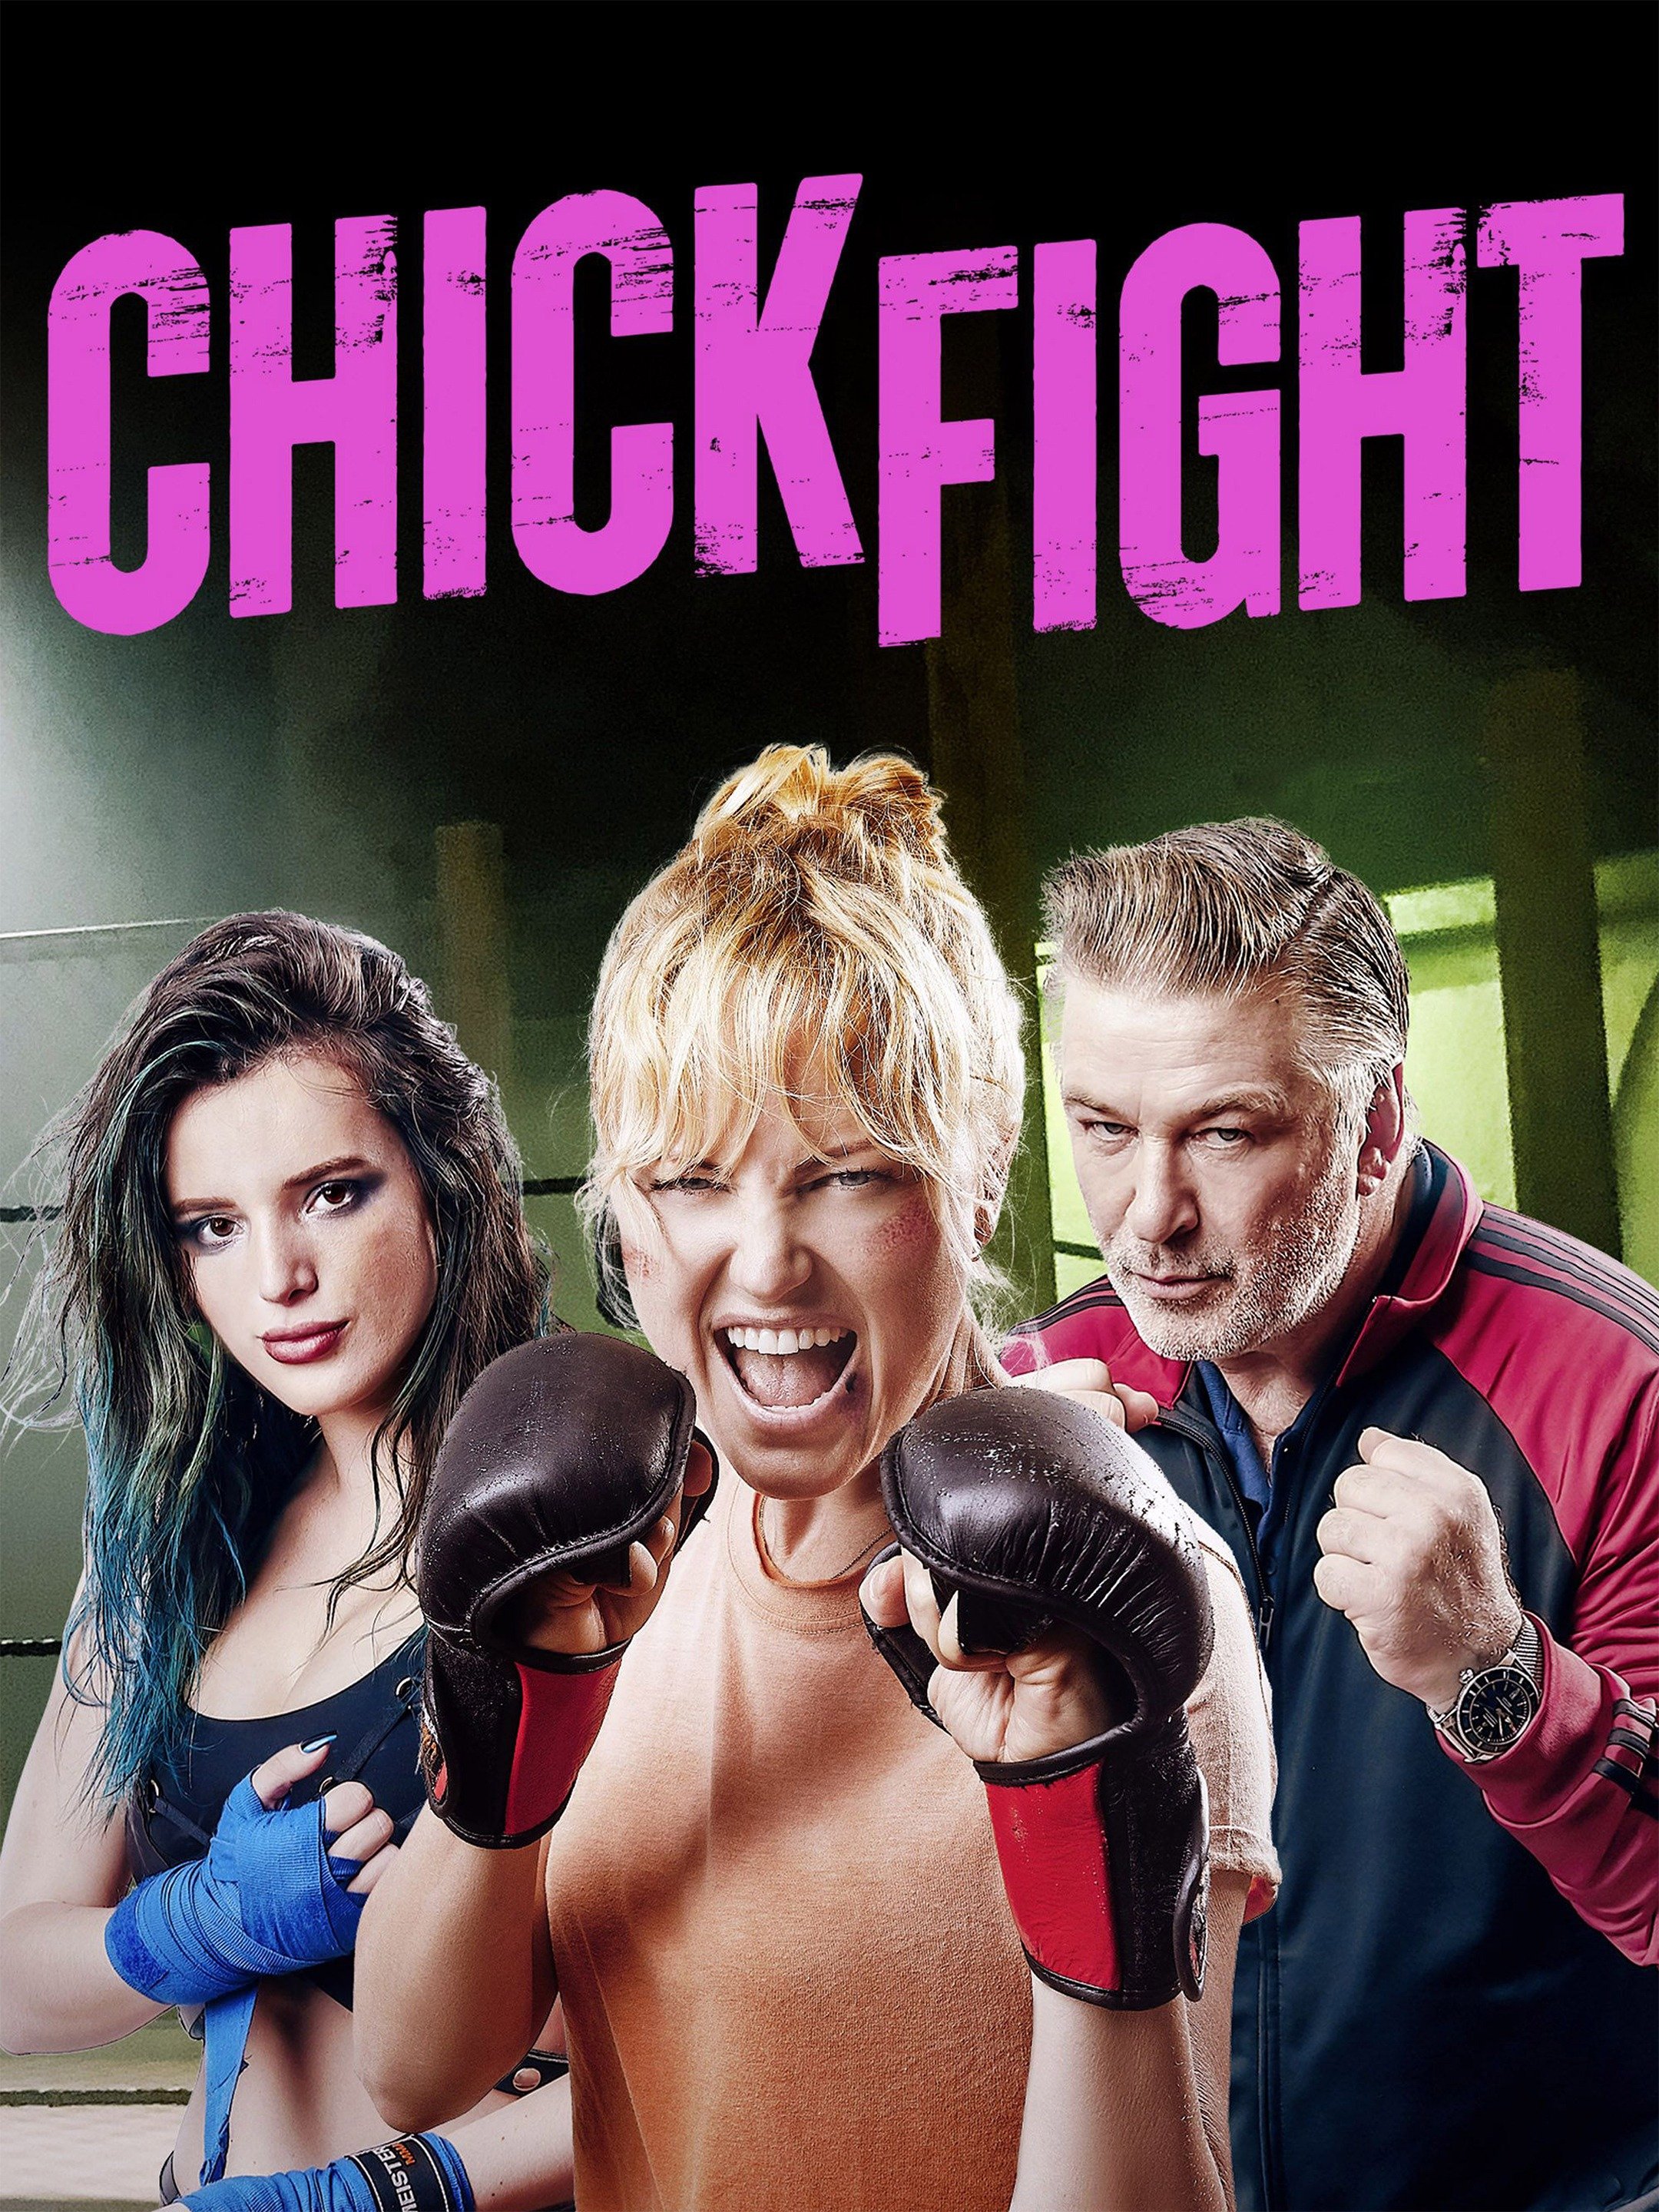 Chick Fight Movie Clip I Want You To Train Me Trailers Videos